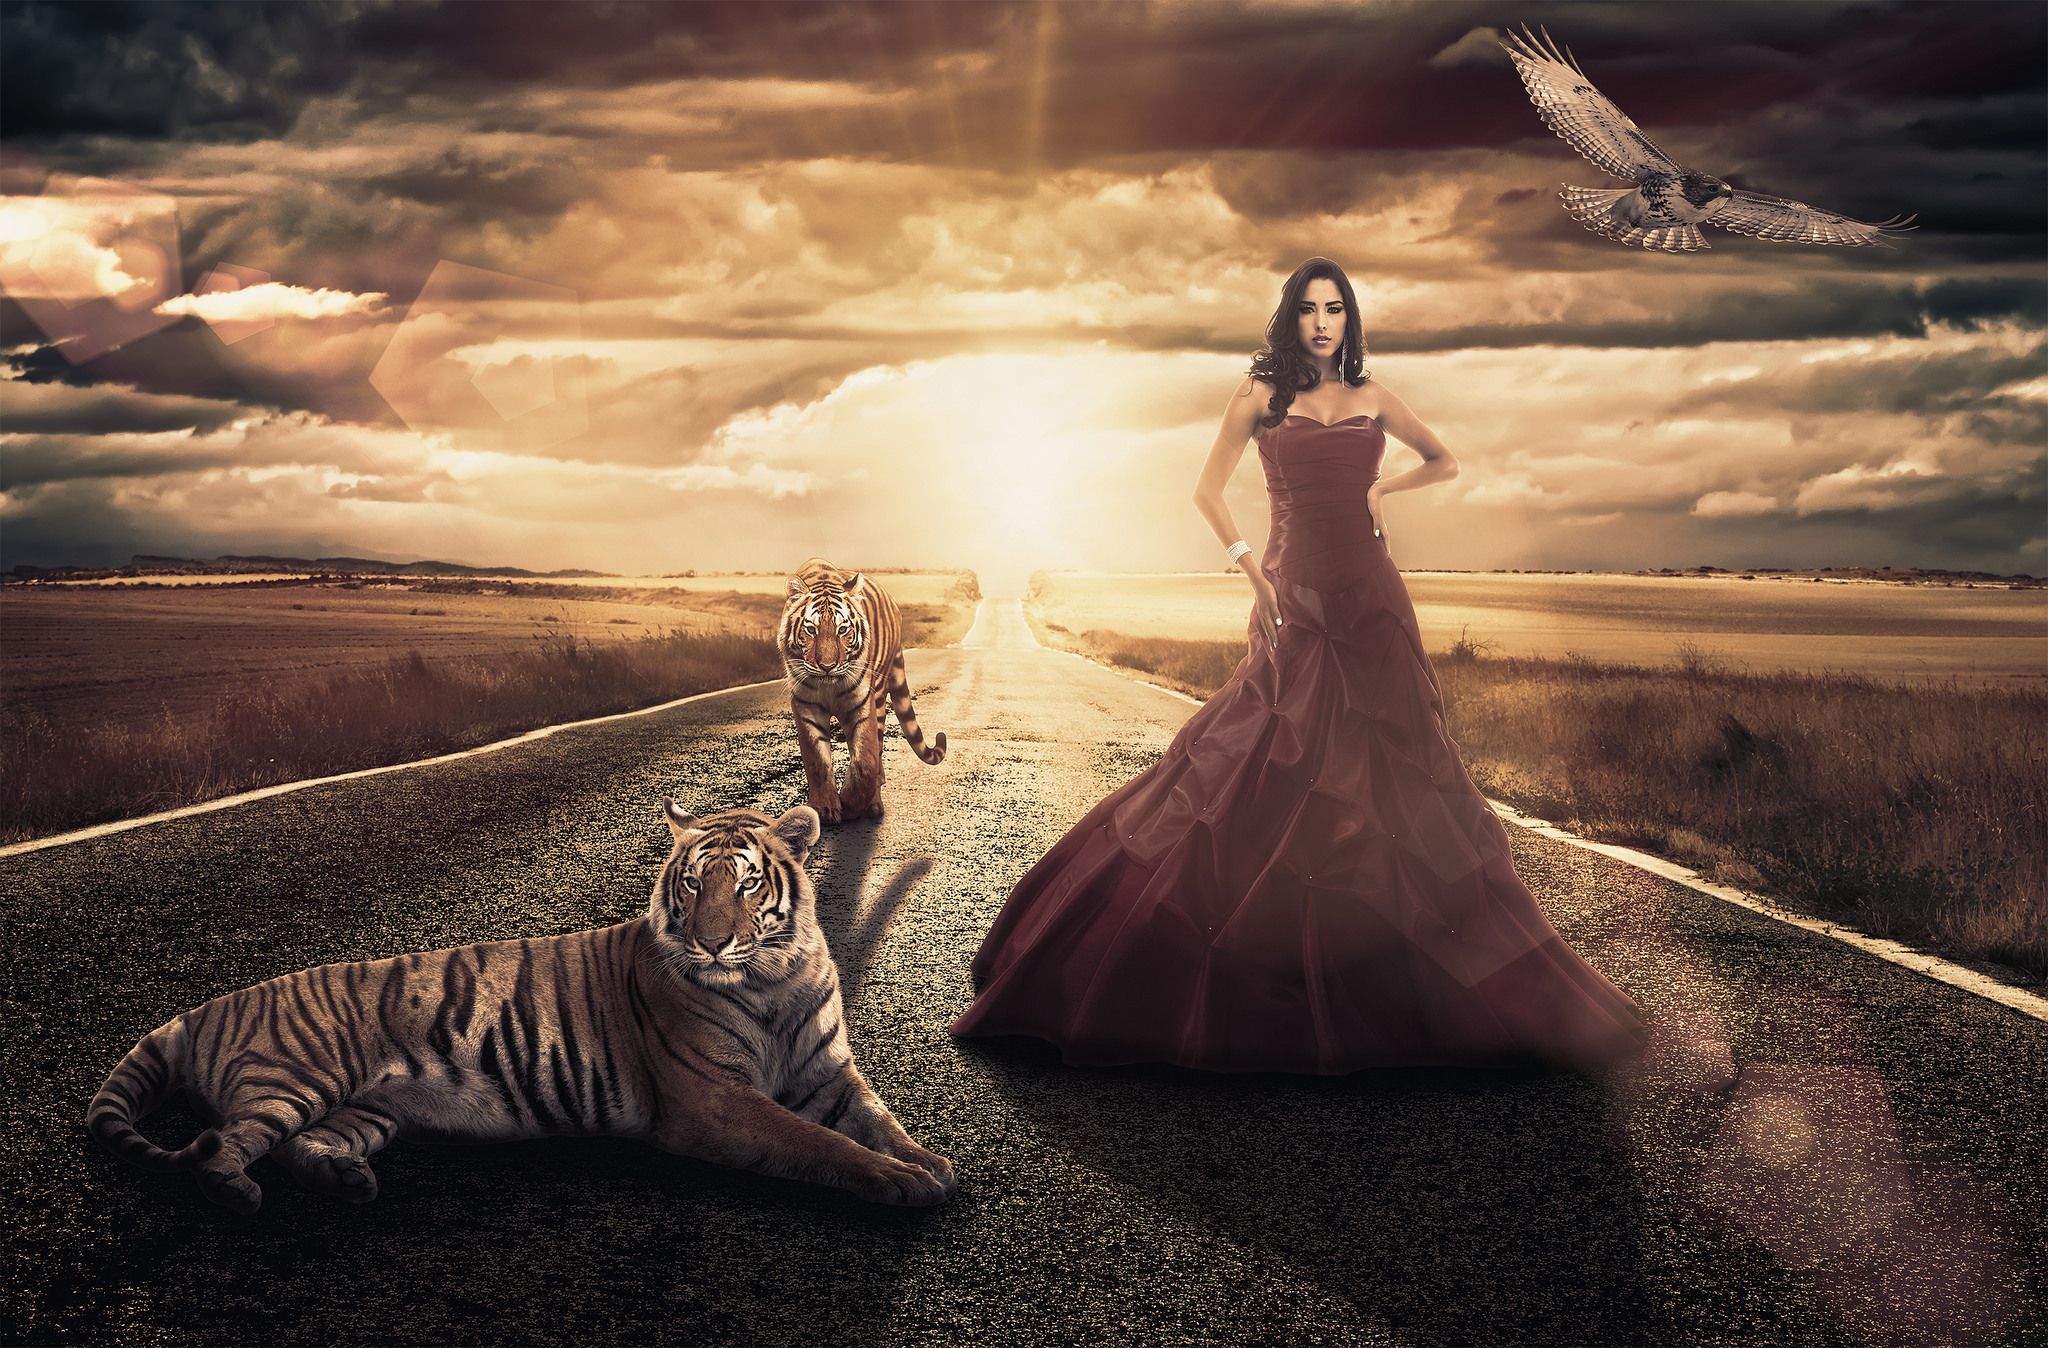 Photo Tigers Big cats Brunette girl Nature Fantasy young 2048x1348